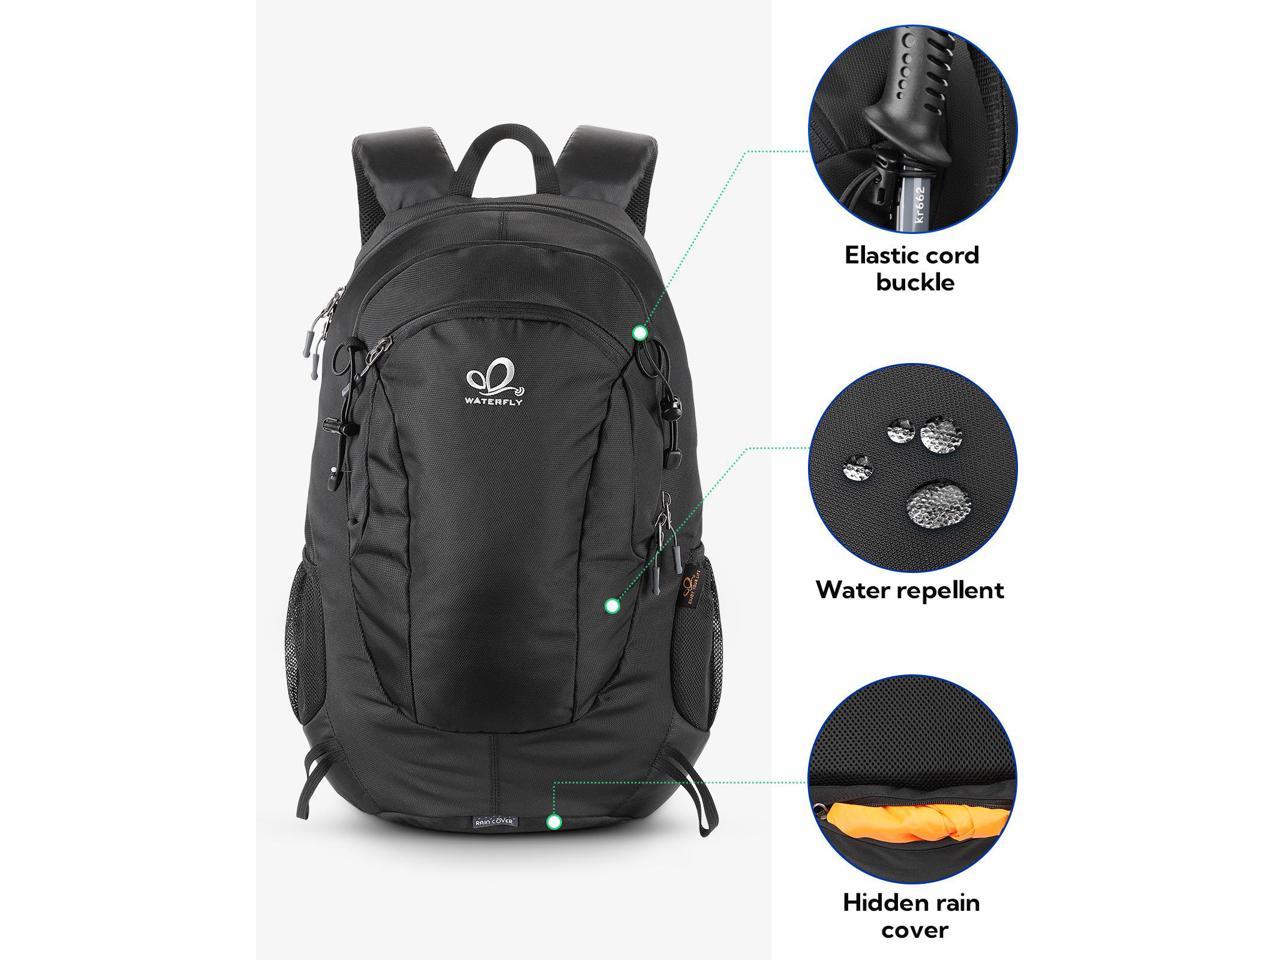 WATERFLY Travel Backpack Foldable Causal Daypack for Hiking Camping Outdoor Sports Daily Use 